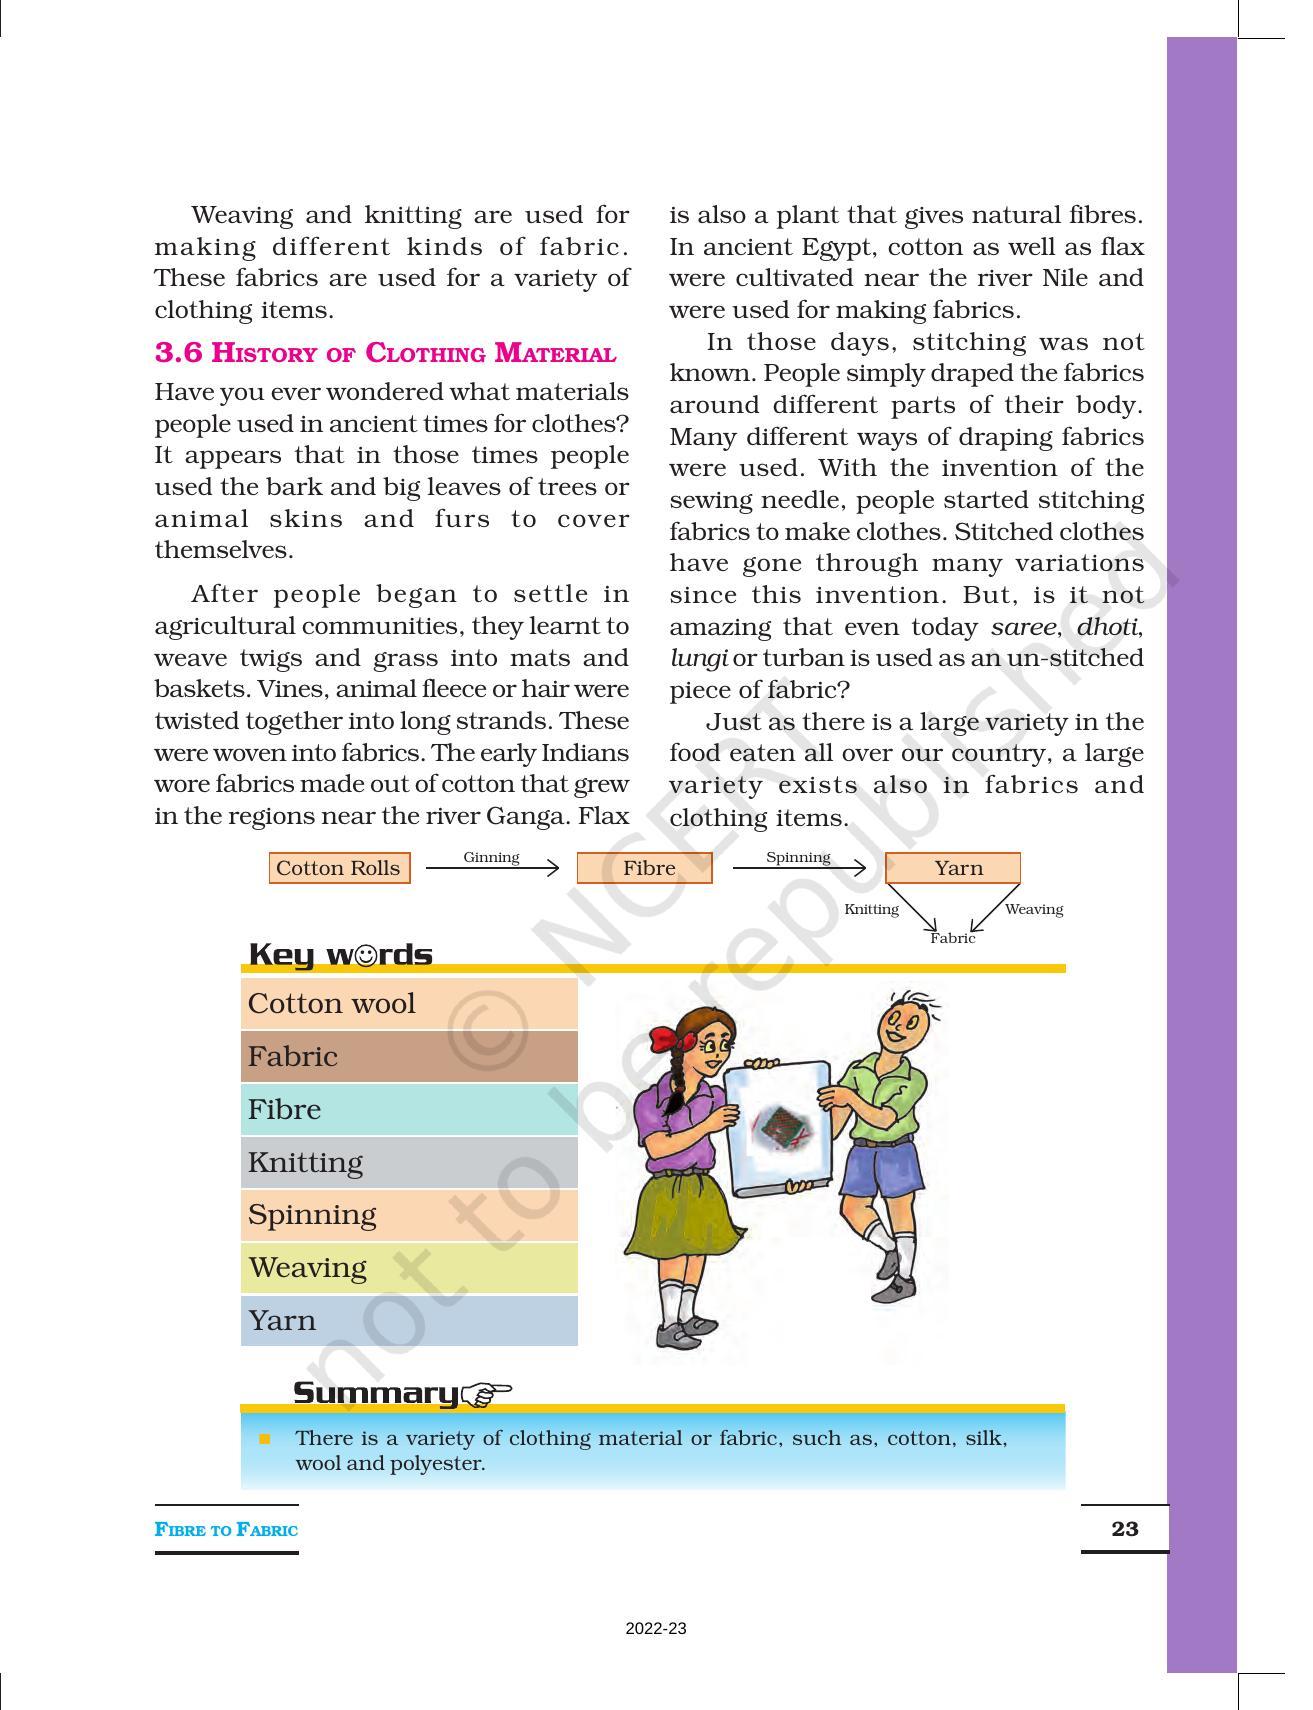 NCERT Book for Class 6 Science: Chapter 3-Fibre to Fabric - Page 6